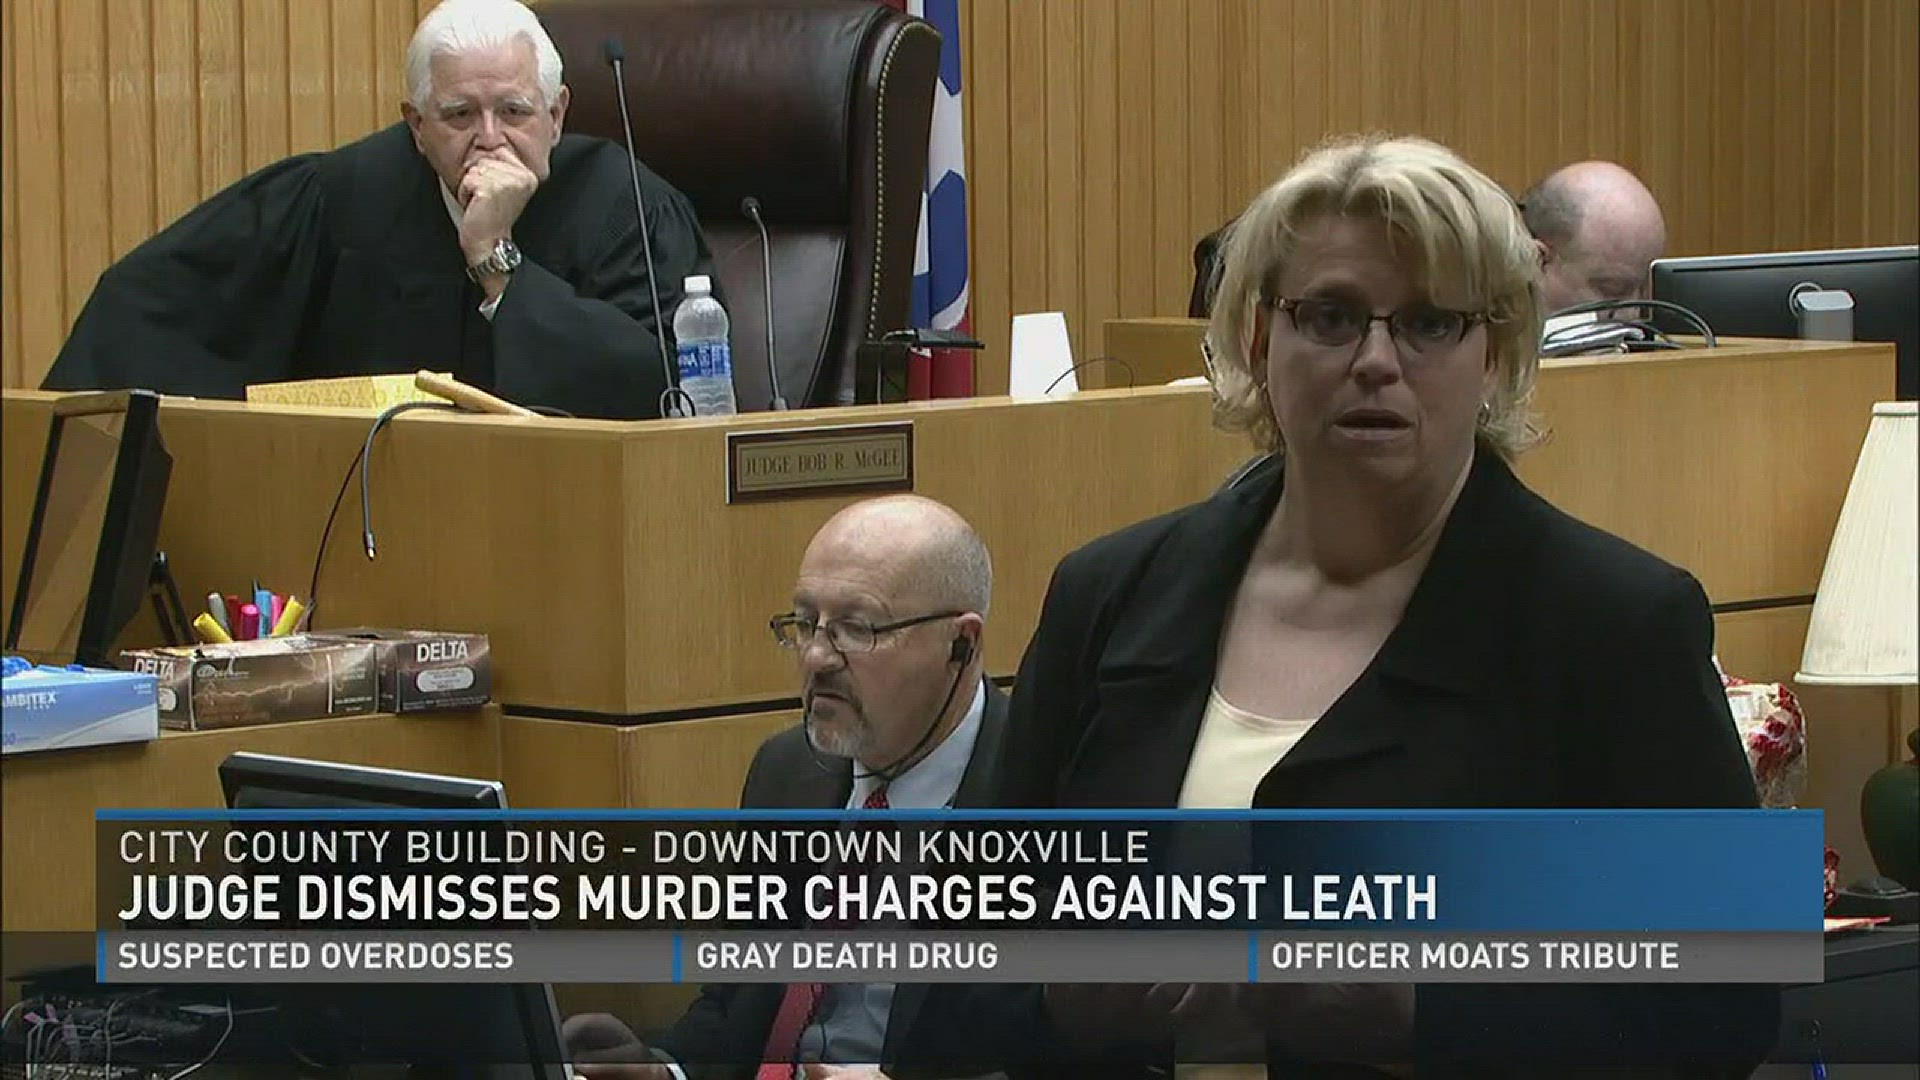 This is the third time that Raynella Leath has stood trial for murder in the 2003 death of her husband, David Leath.